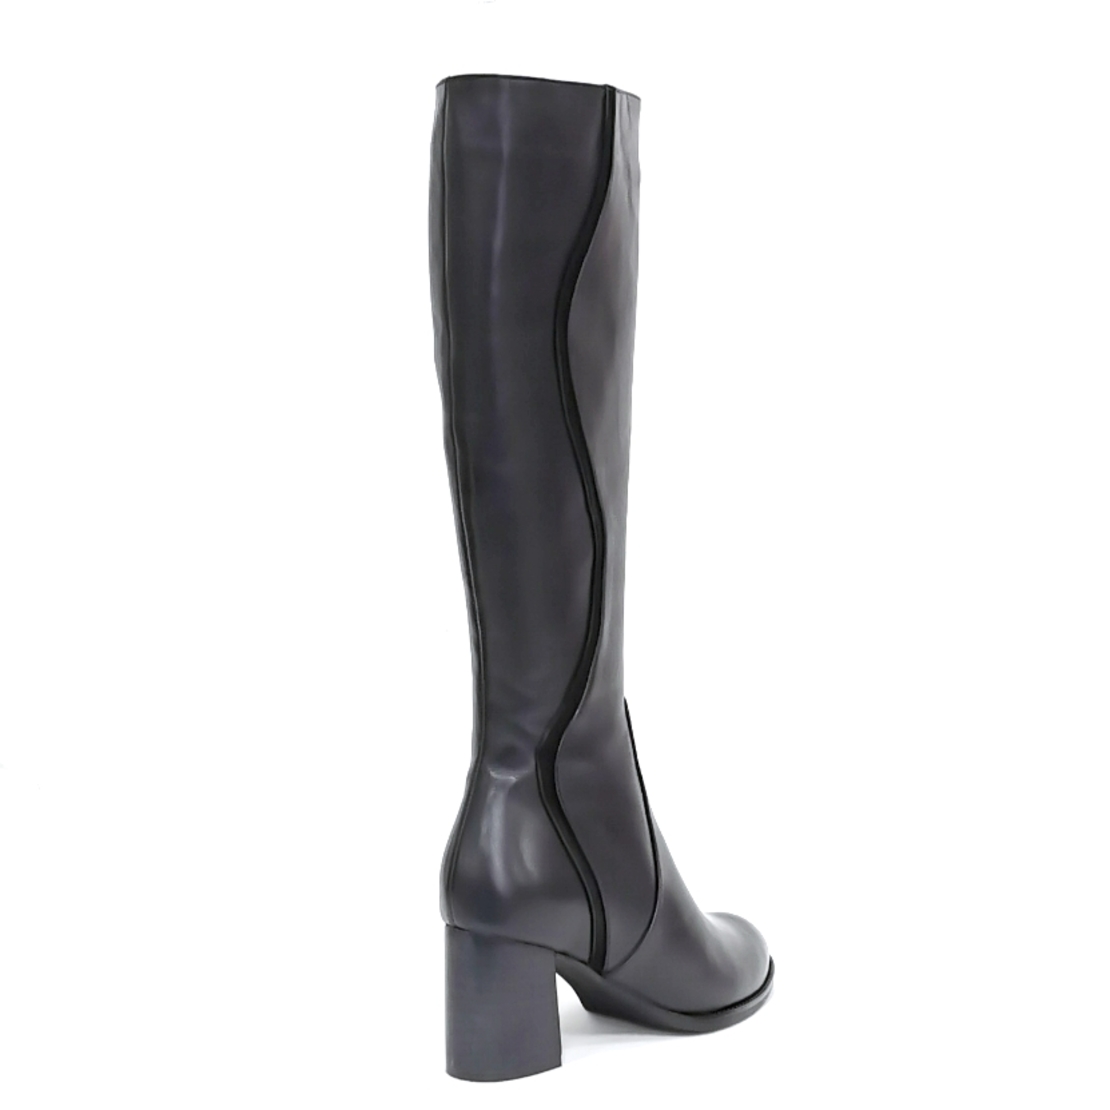 Women's elegant boots made of natural leather in black/7503